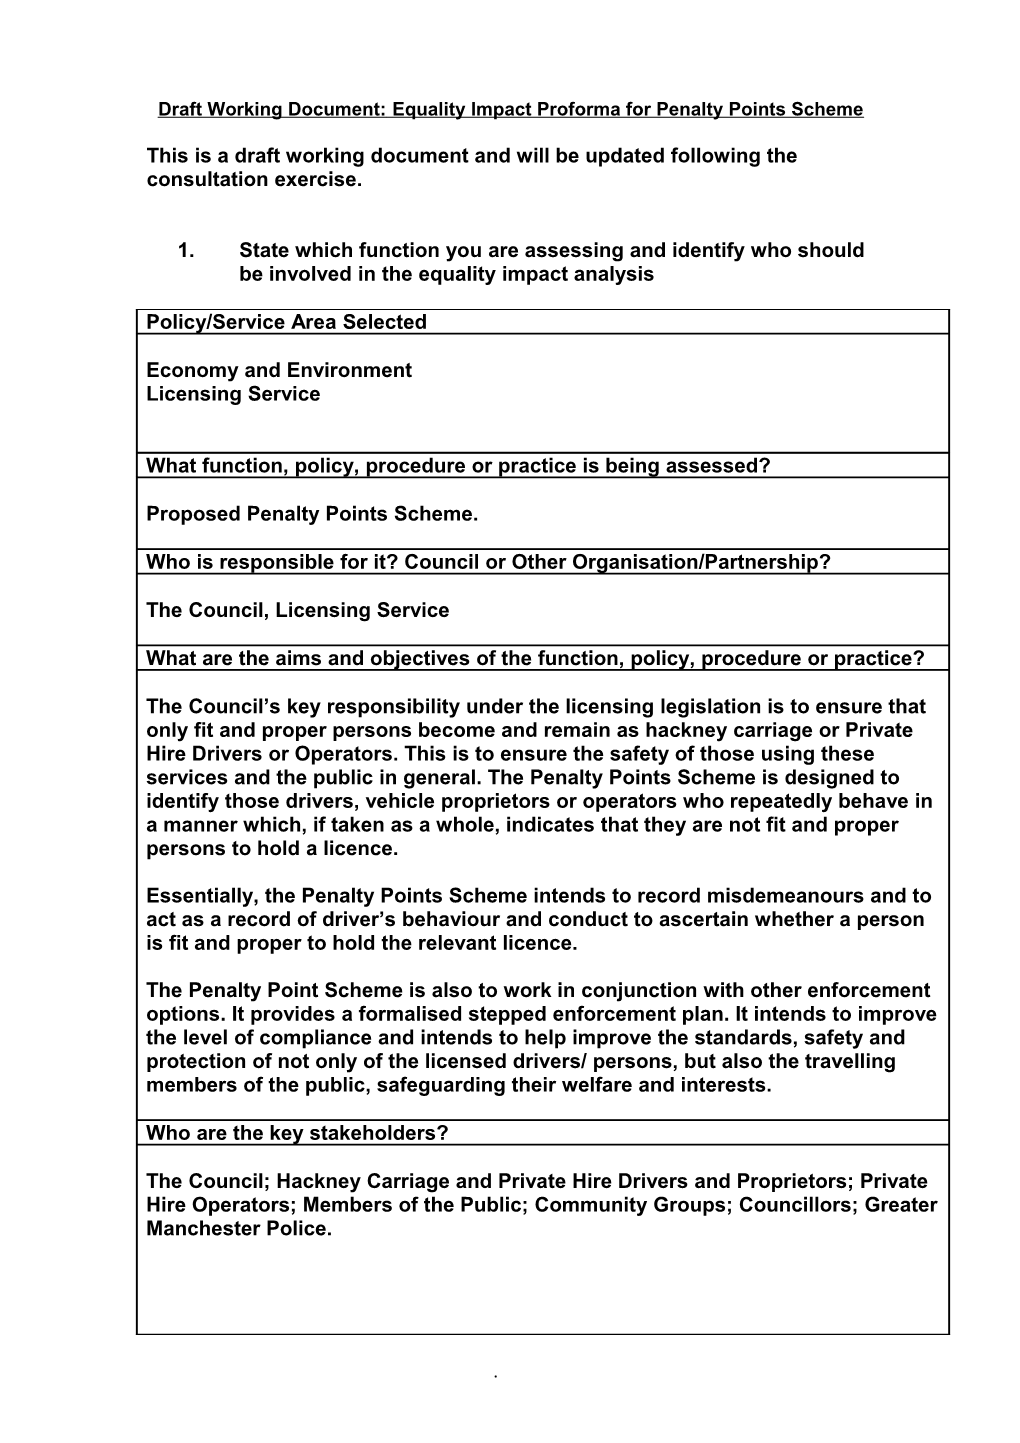 Draft Working Document:Equality Impact Proforma for Penalty Points Scheme